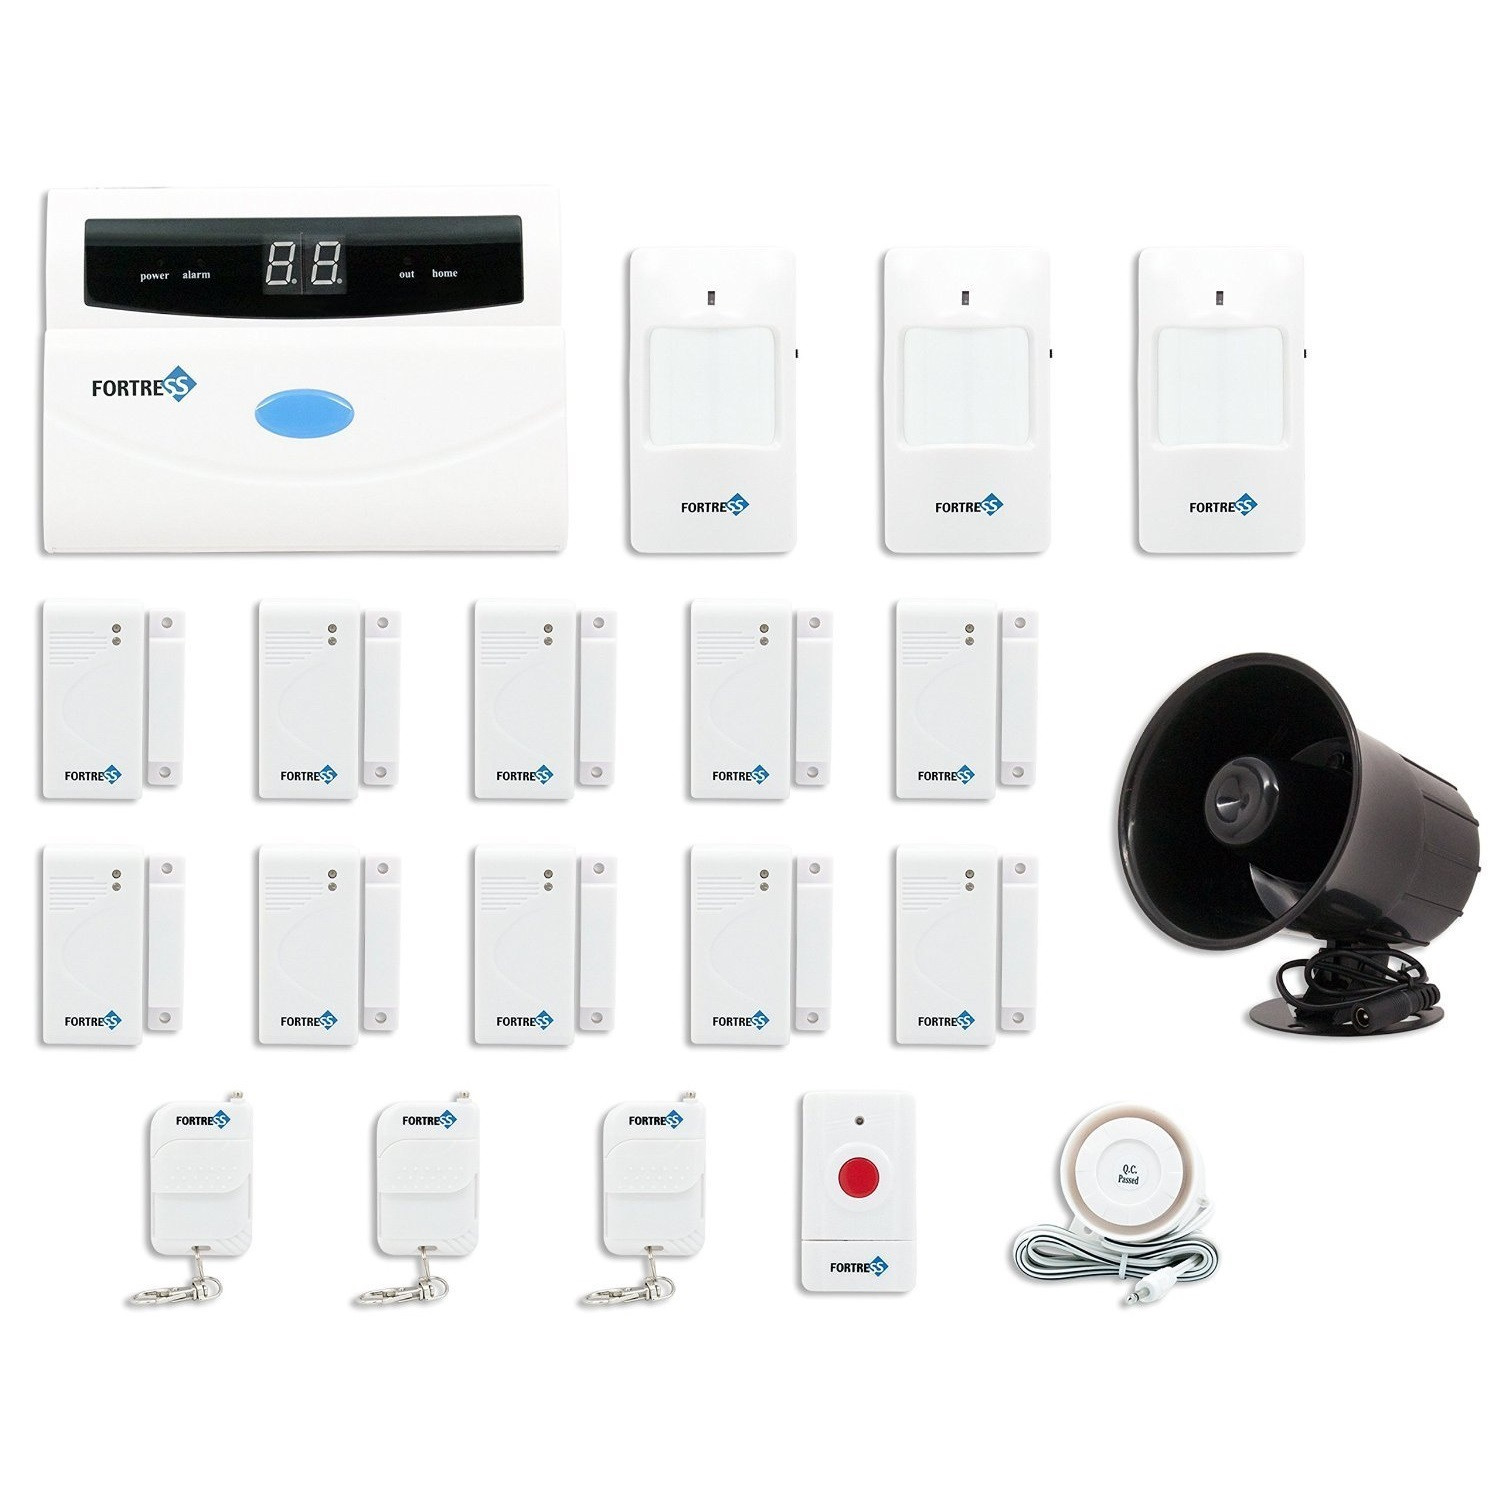 DIY Wireless Home Security Systems
 Fortress Security Store S02 B Wireless DIY Home Security